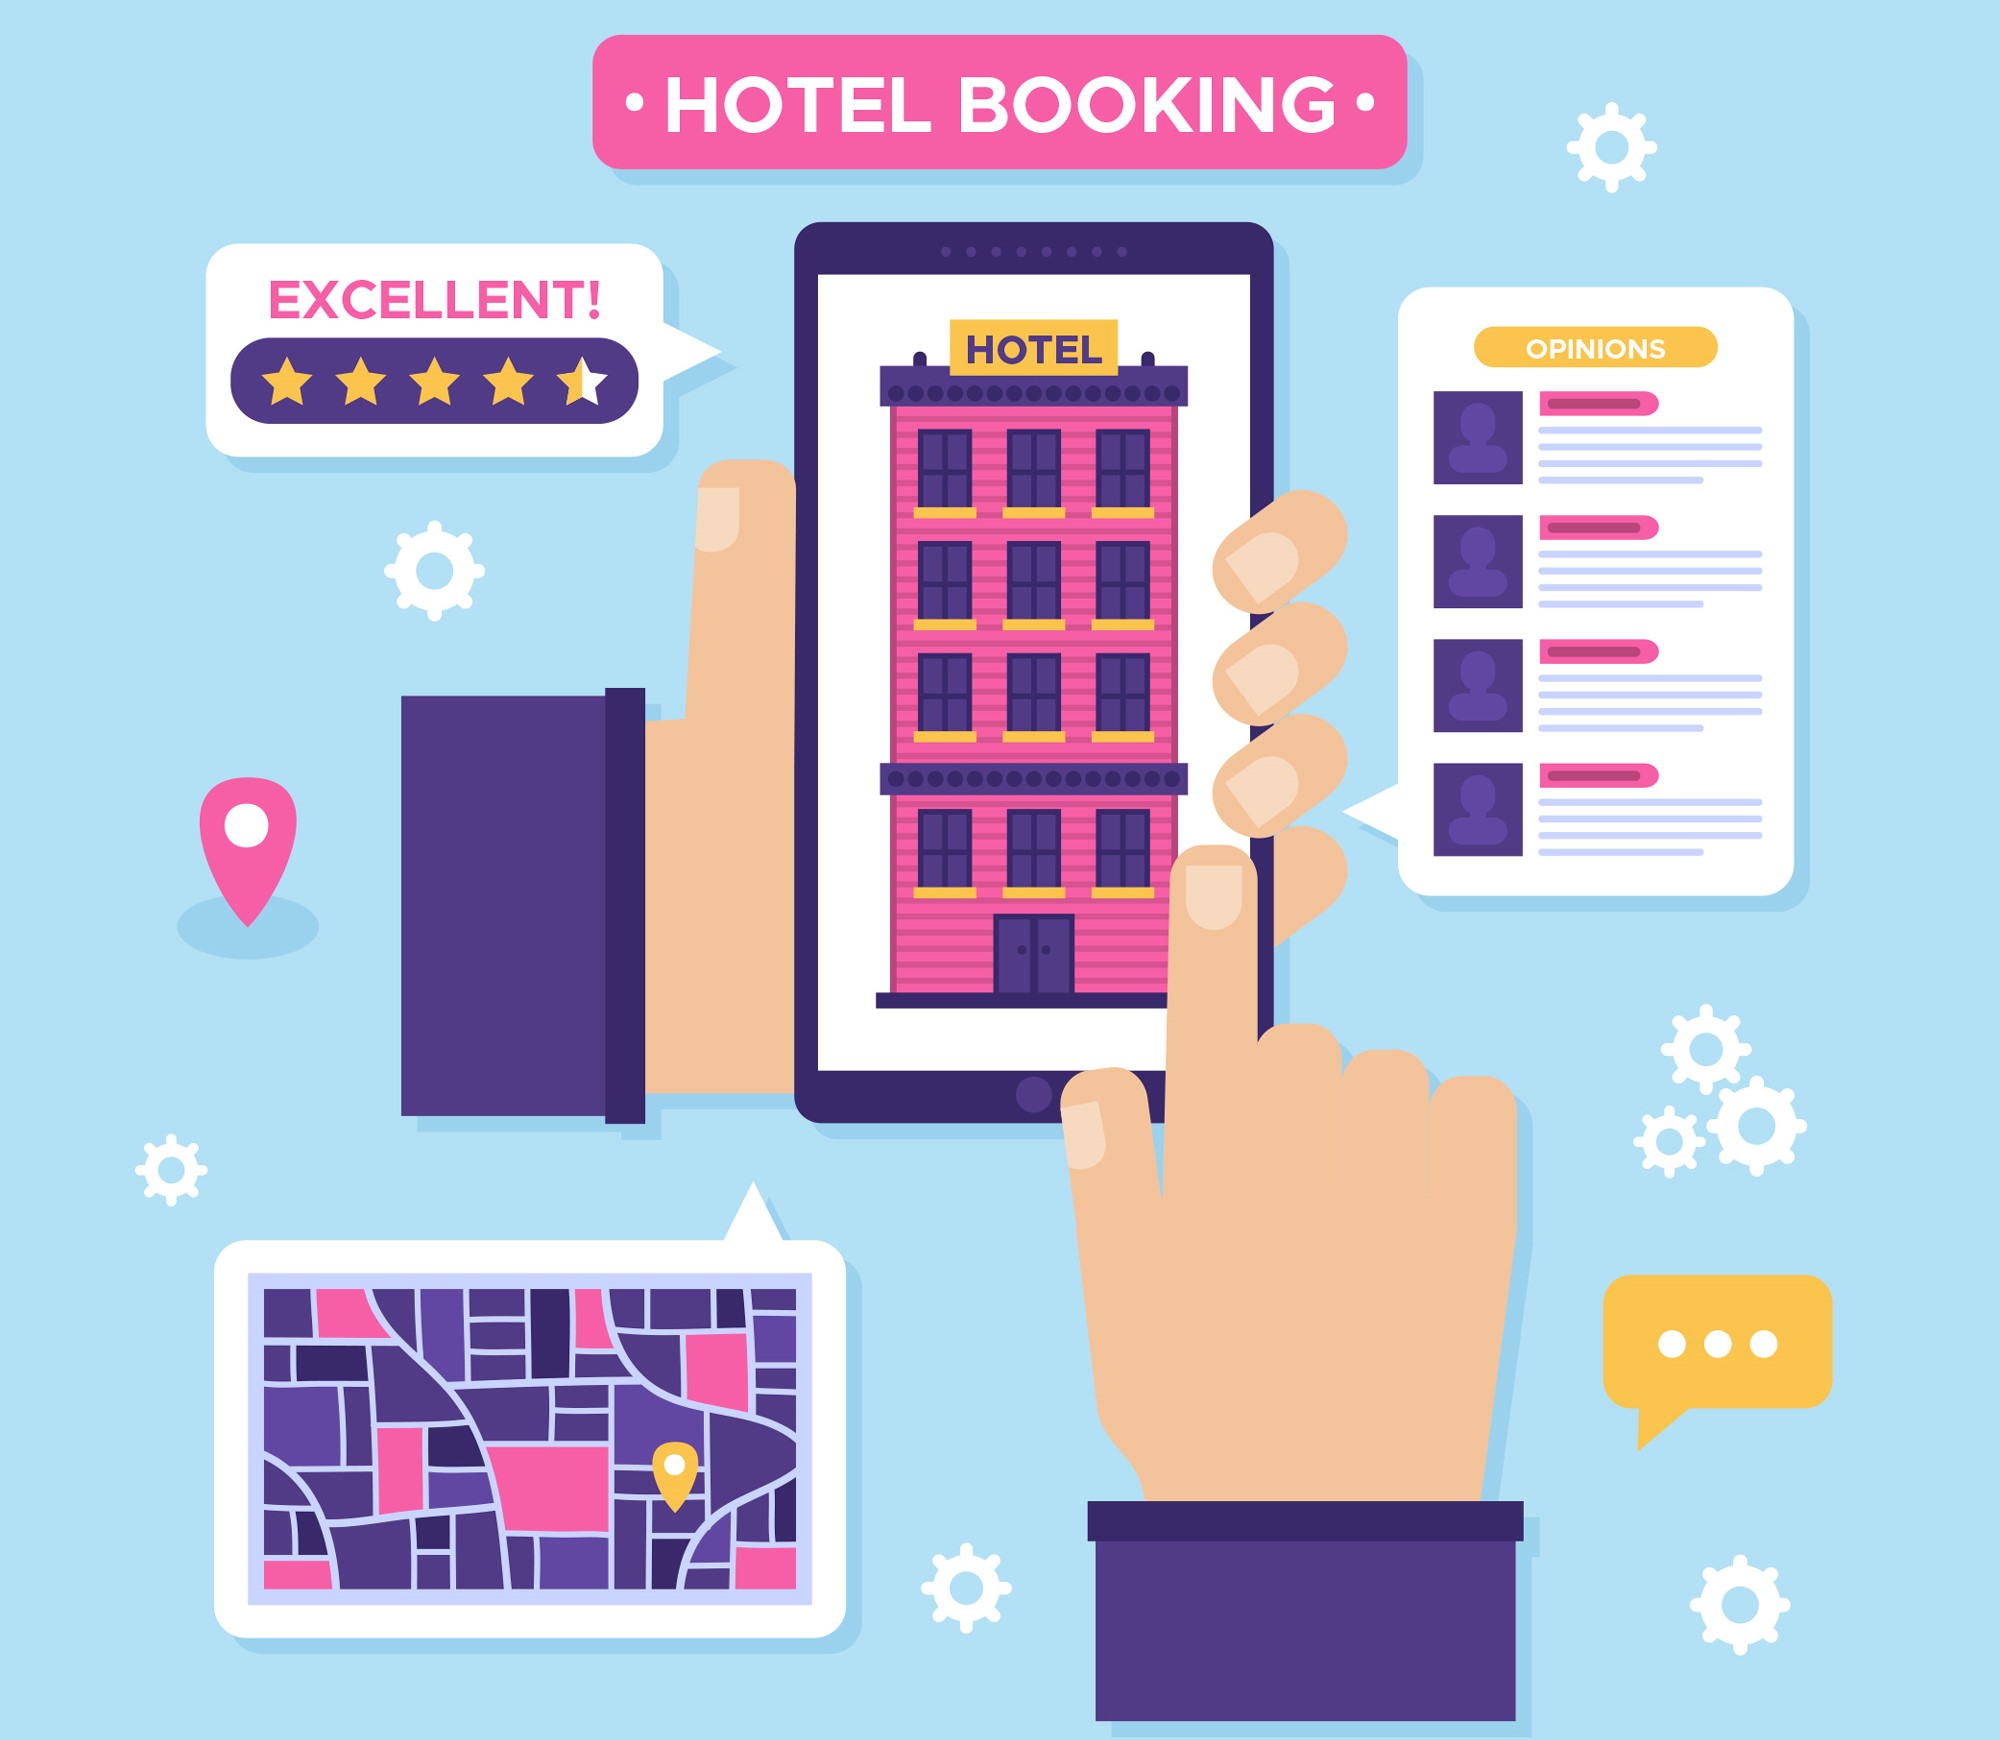 Free listing of Google hotel search